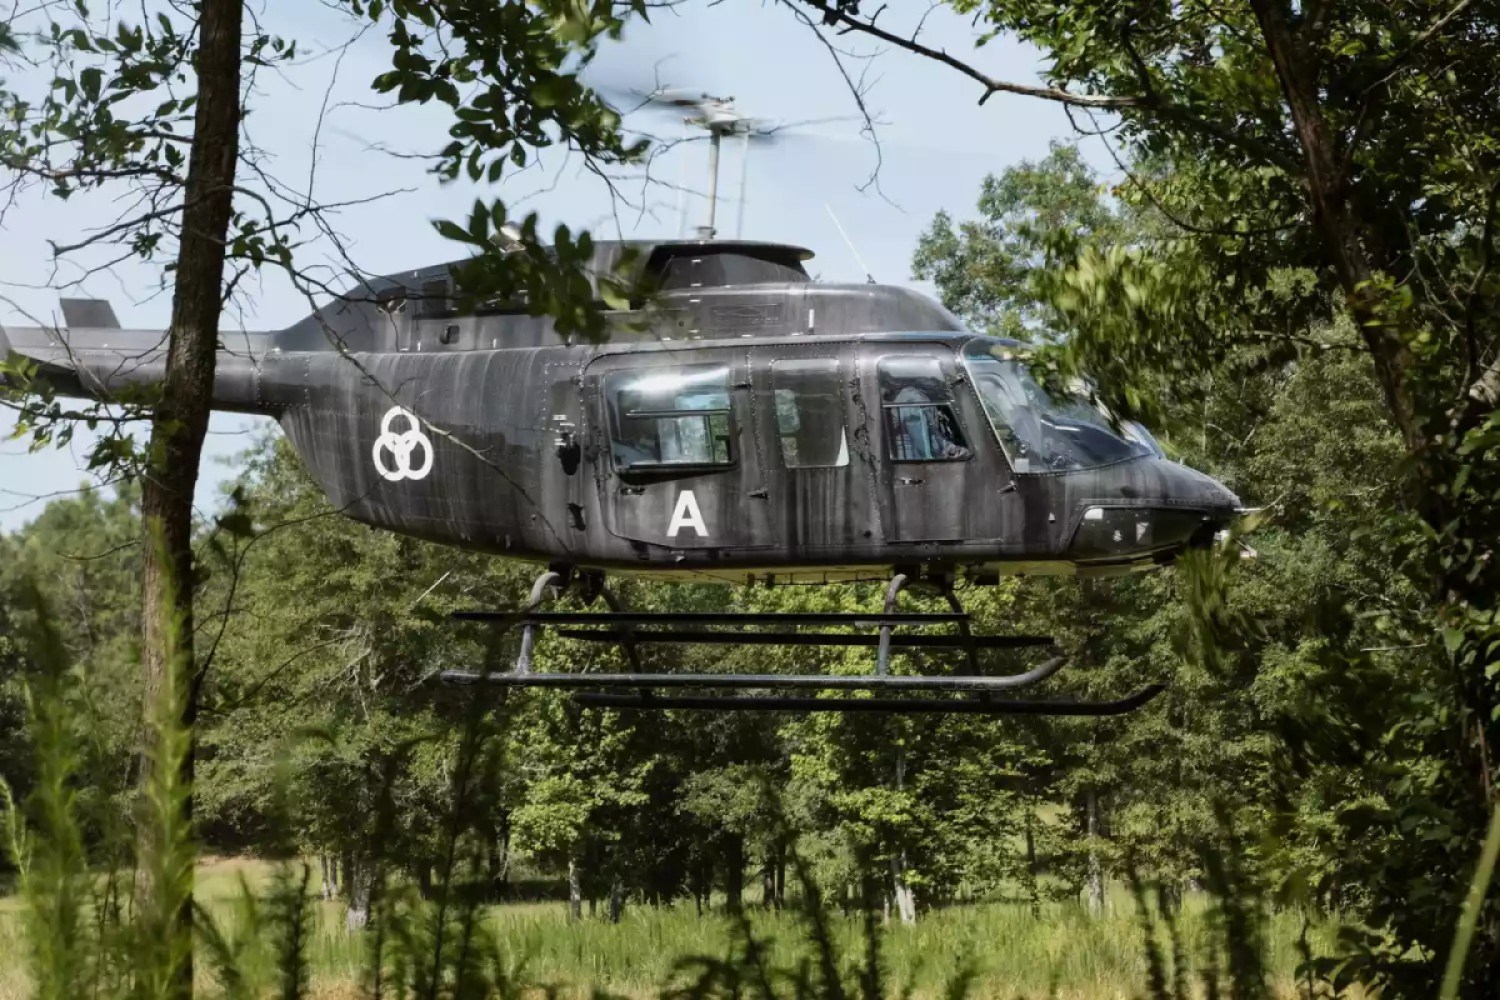 A helicopter with a symbol of three overlapping rings on the side